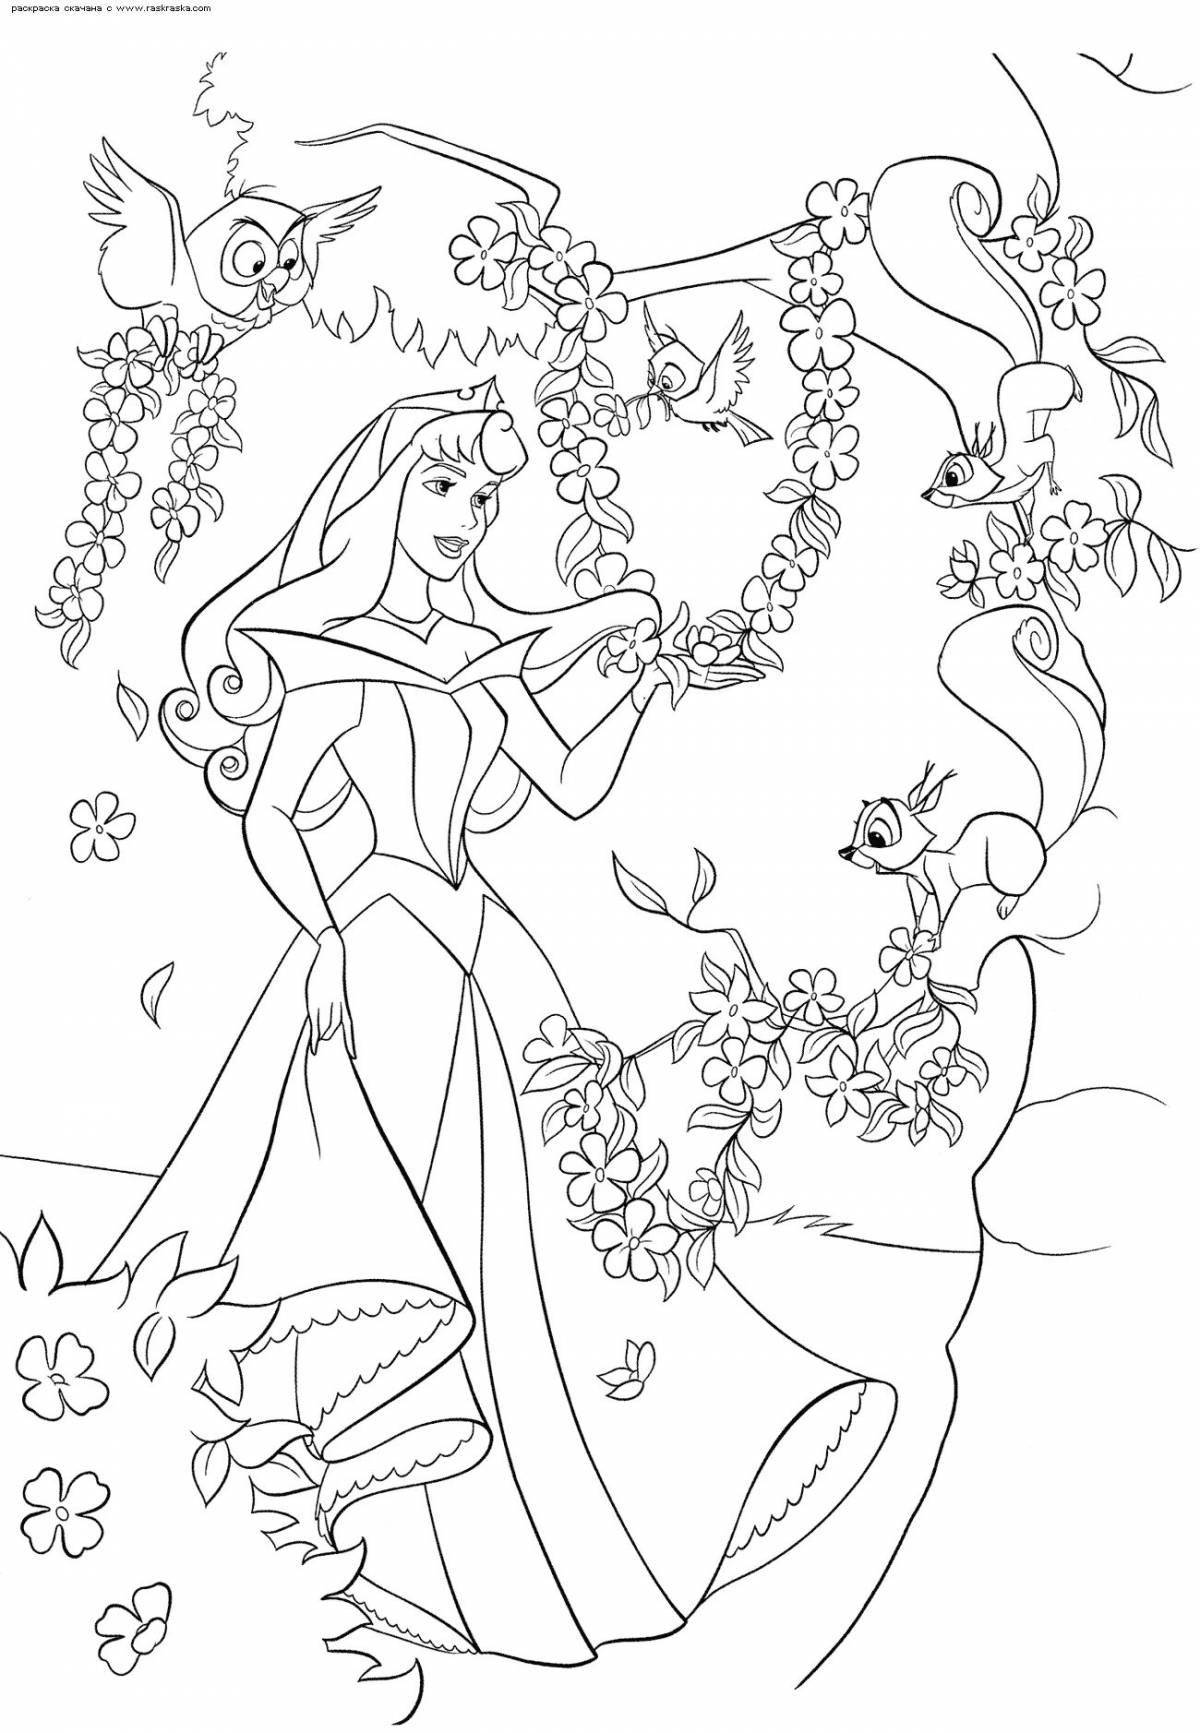 Dreamy aurora coloring book for kids